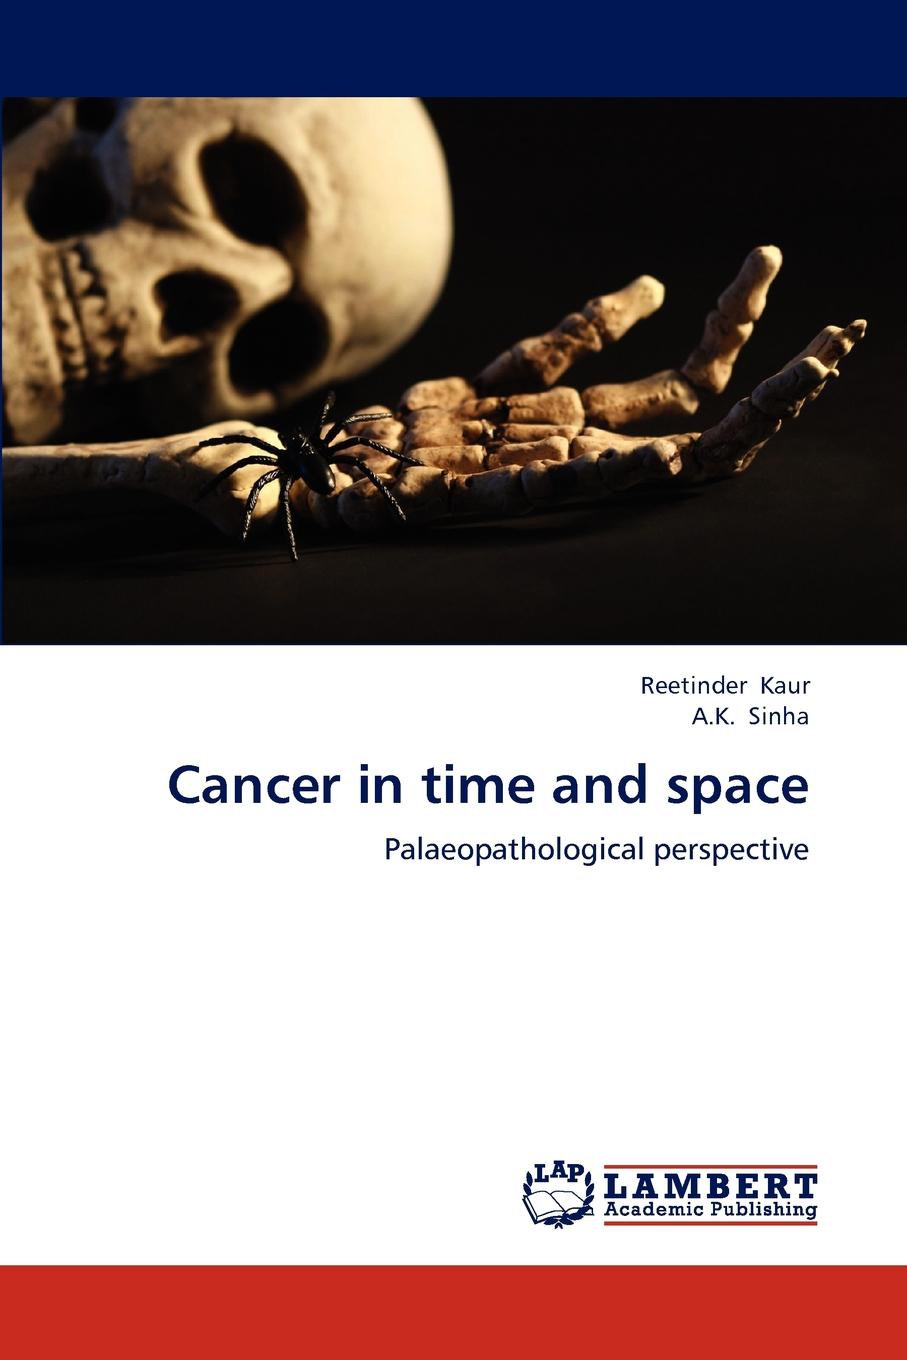 Cancer in time and space